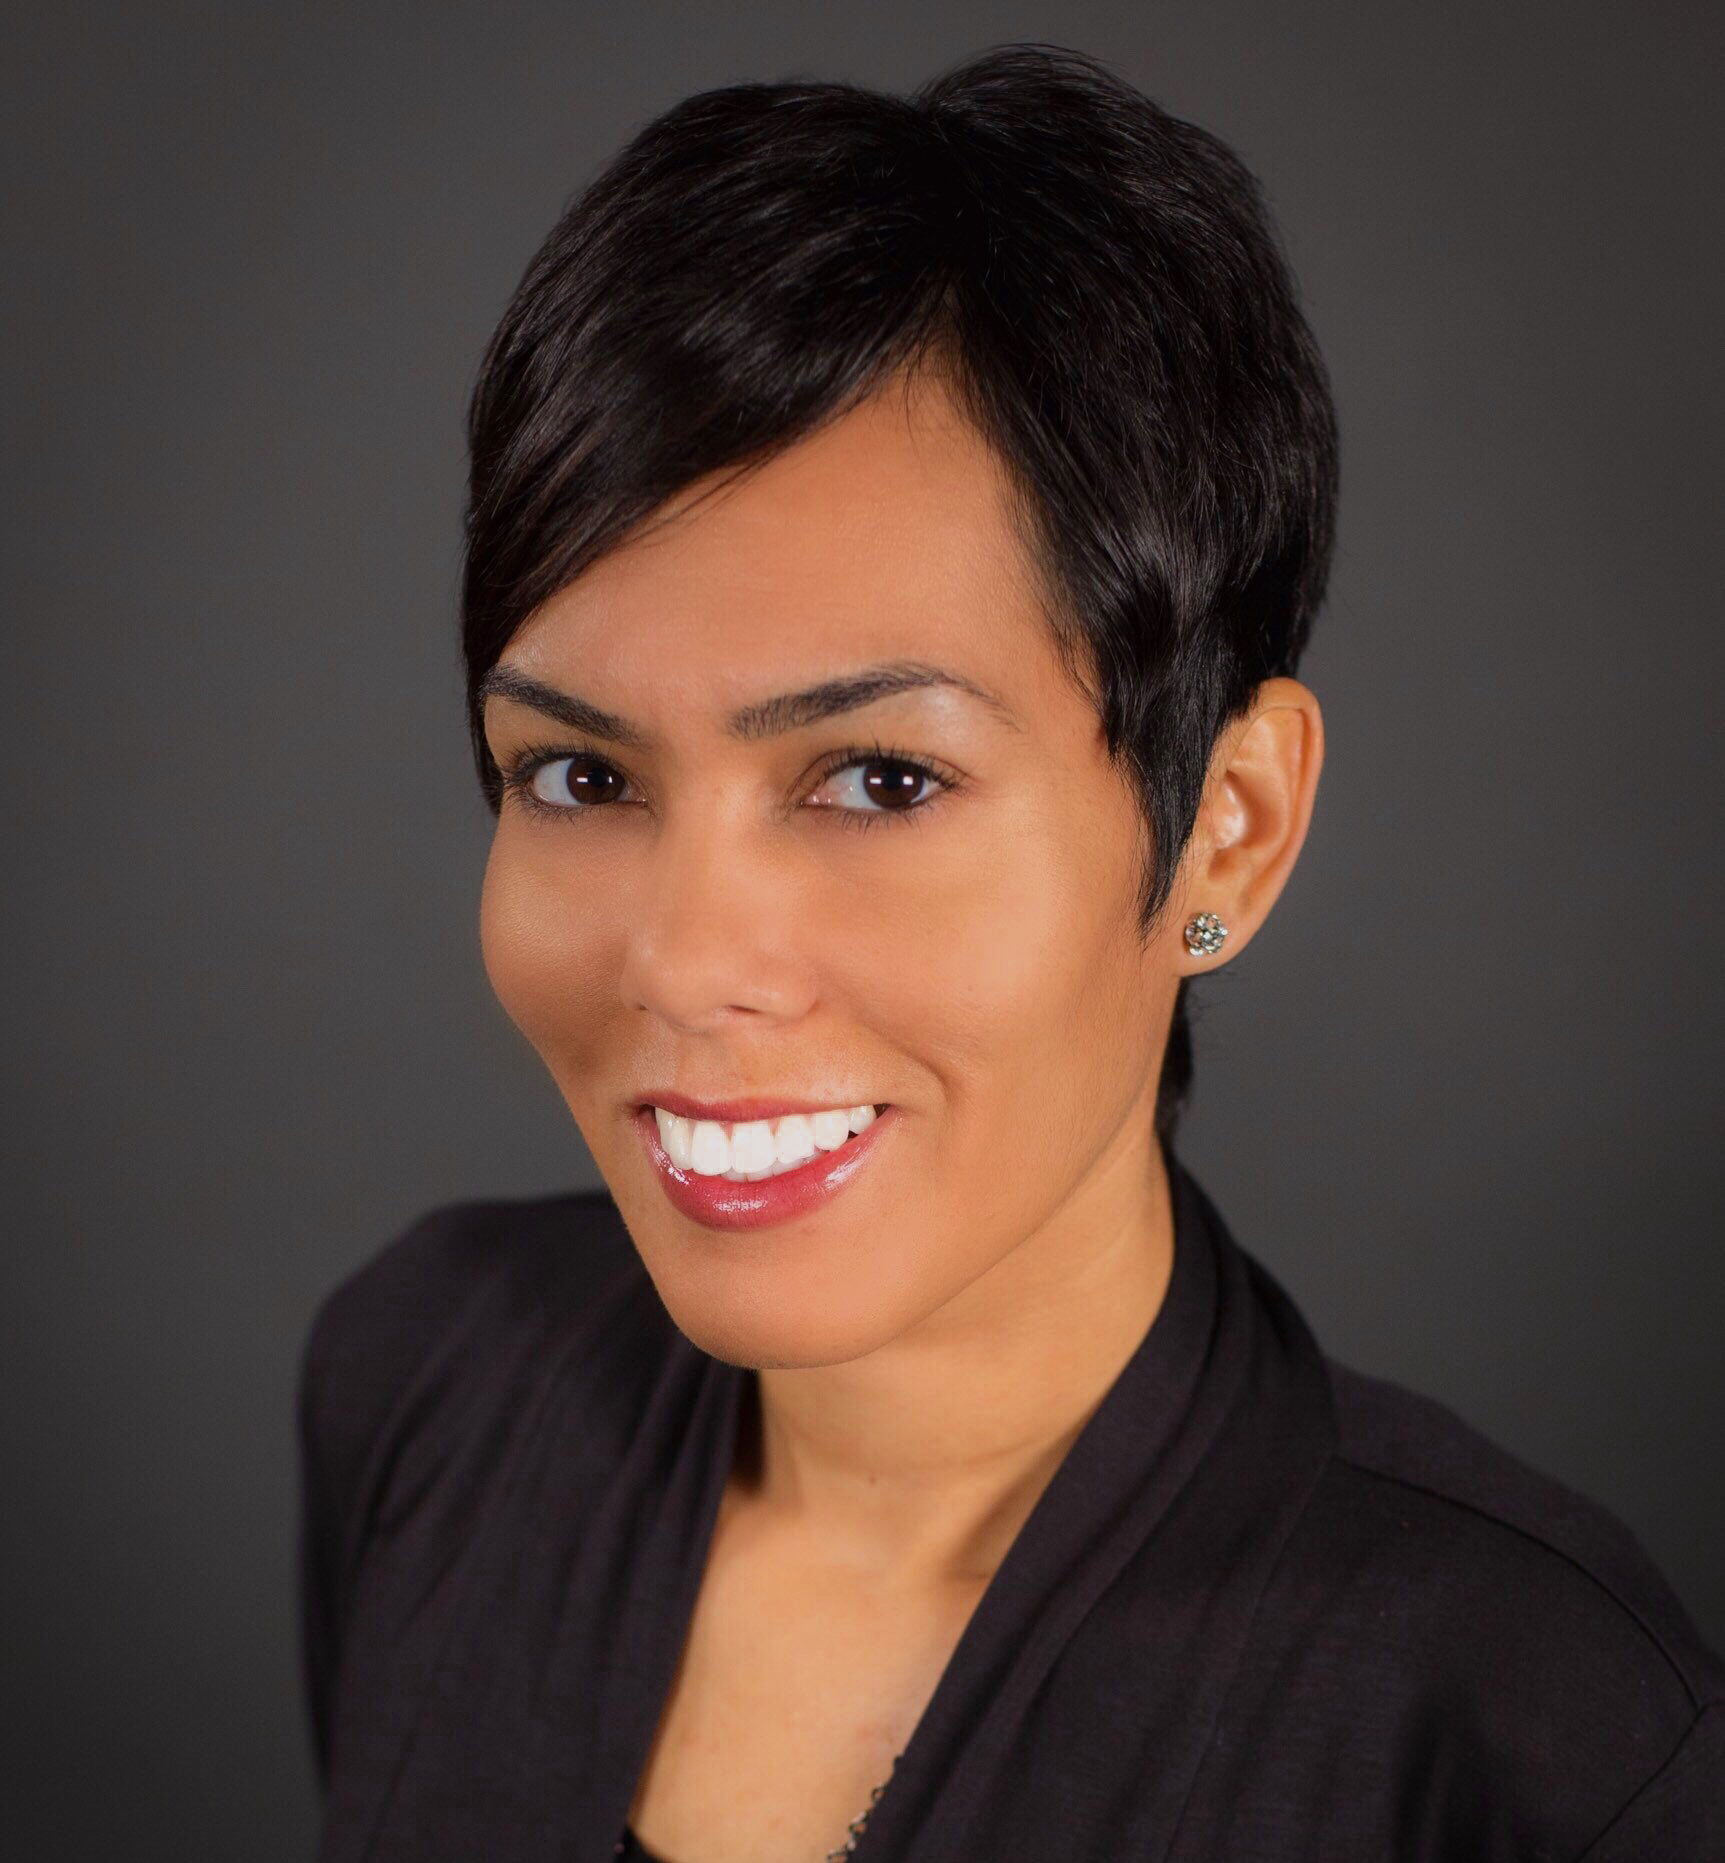 Dalila Ramos has nearly two decades of experience in the mortgage industry, and is the business development director for Planet Home Lending